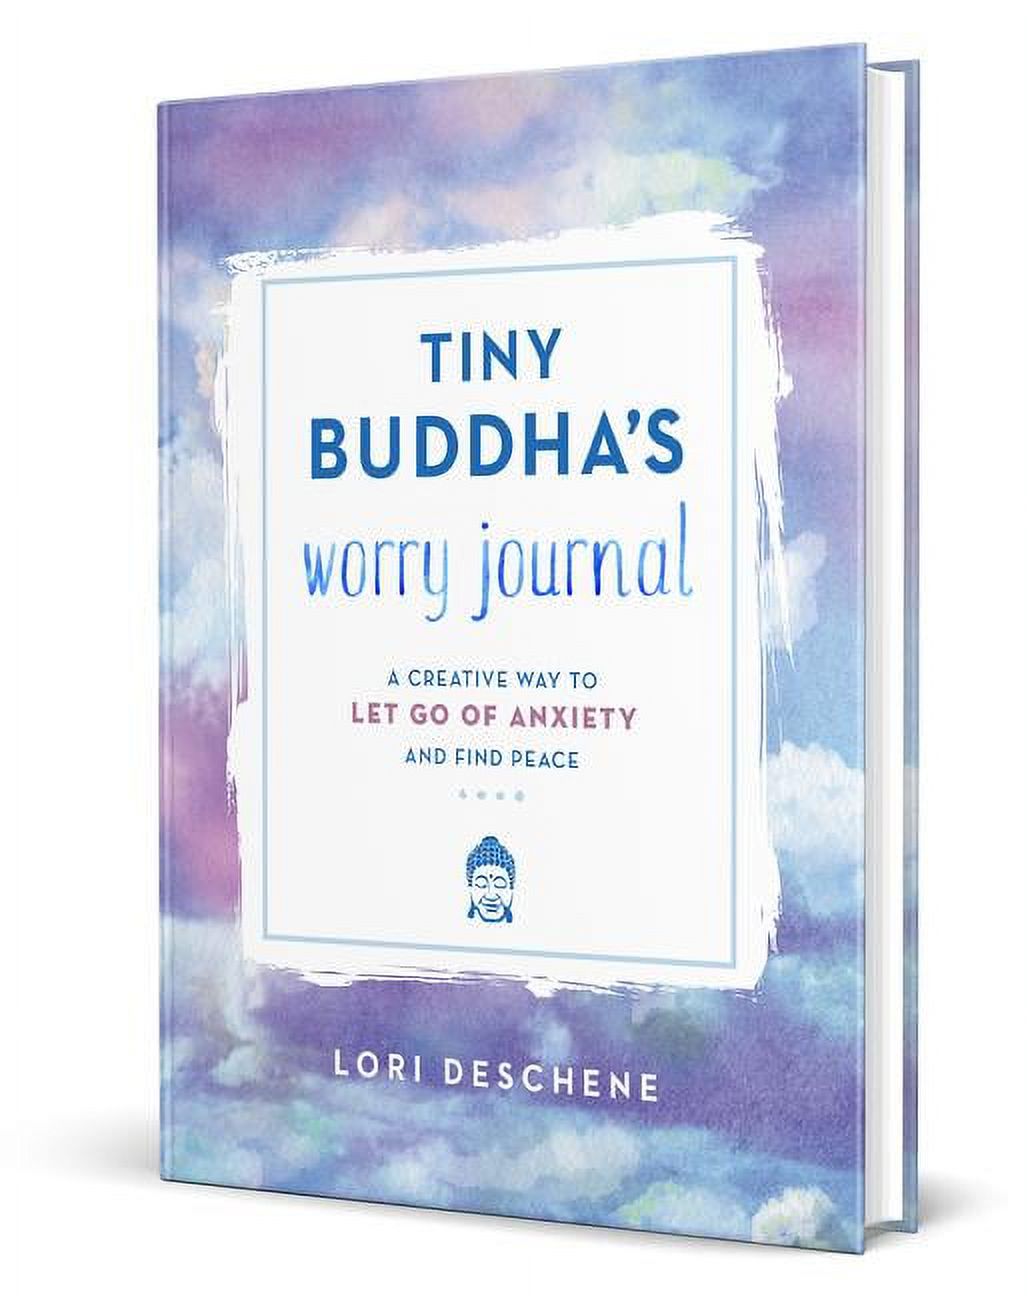 Tiny Buddha's Worry Journal: A Creative Way to Let Go of Anxiety and Find Peace (Hardcover) - image 1 of 1